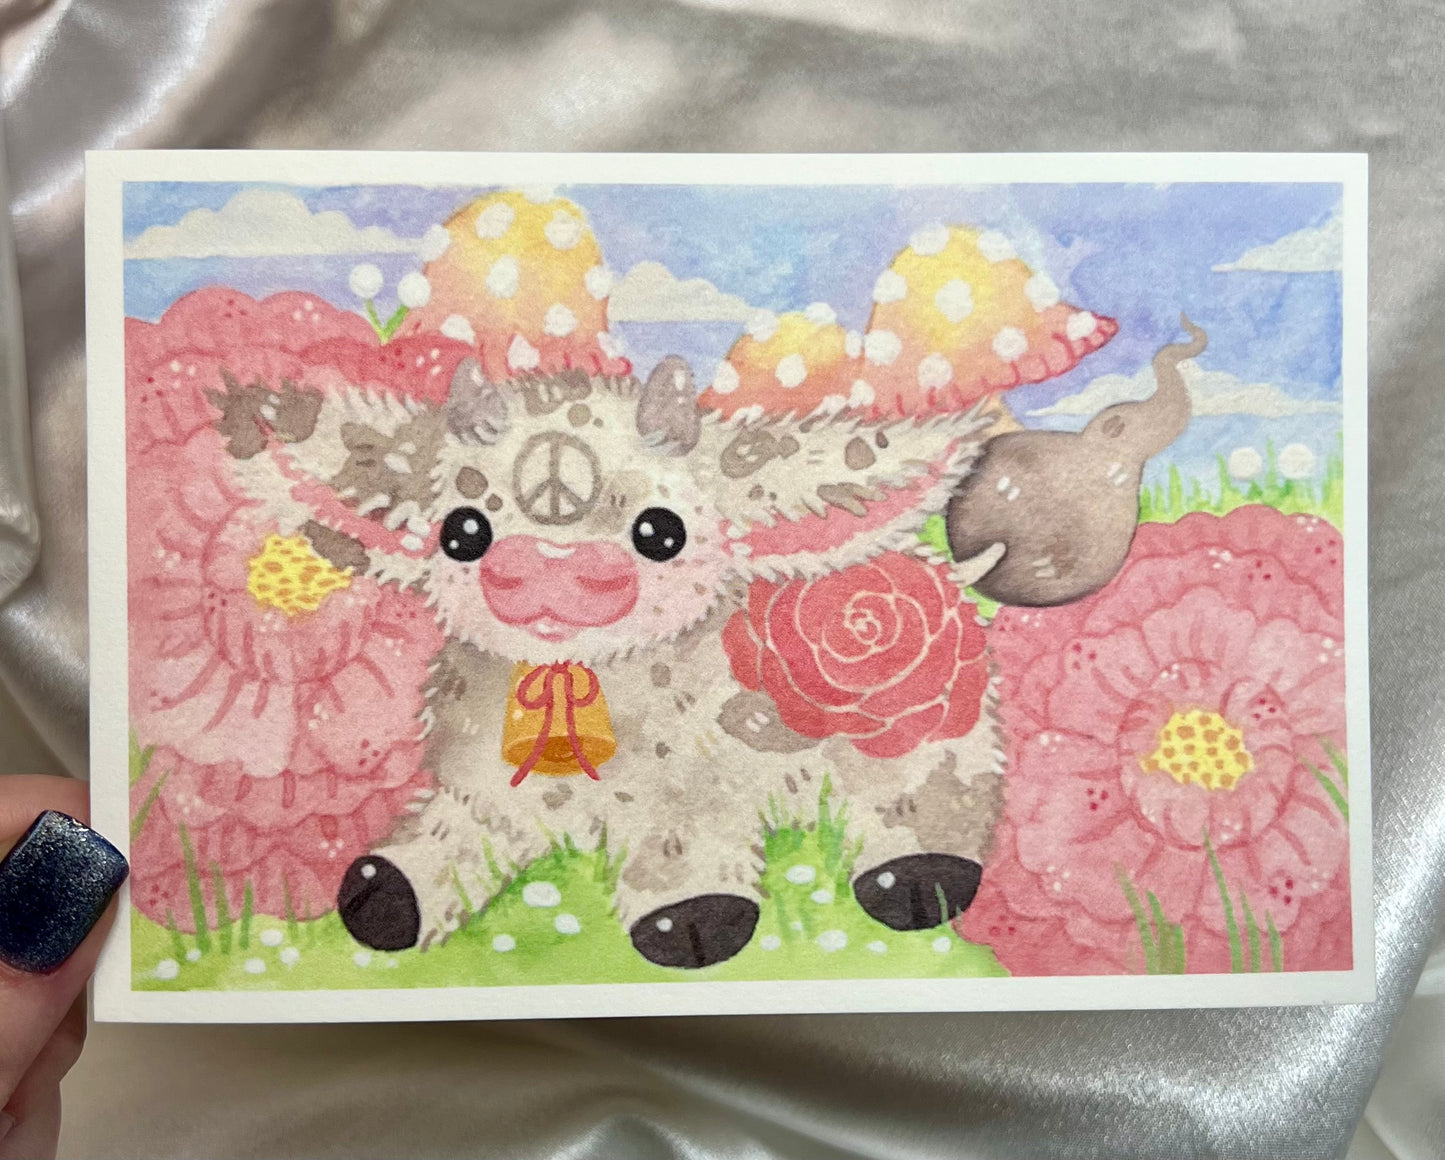 Soft Cow and Peonies Cotton Print